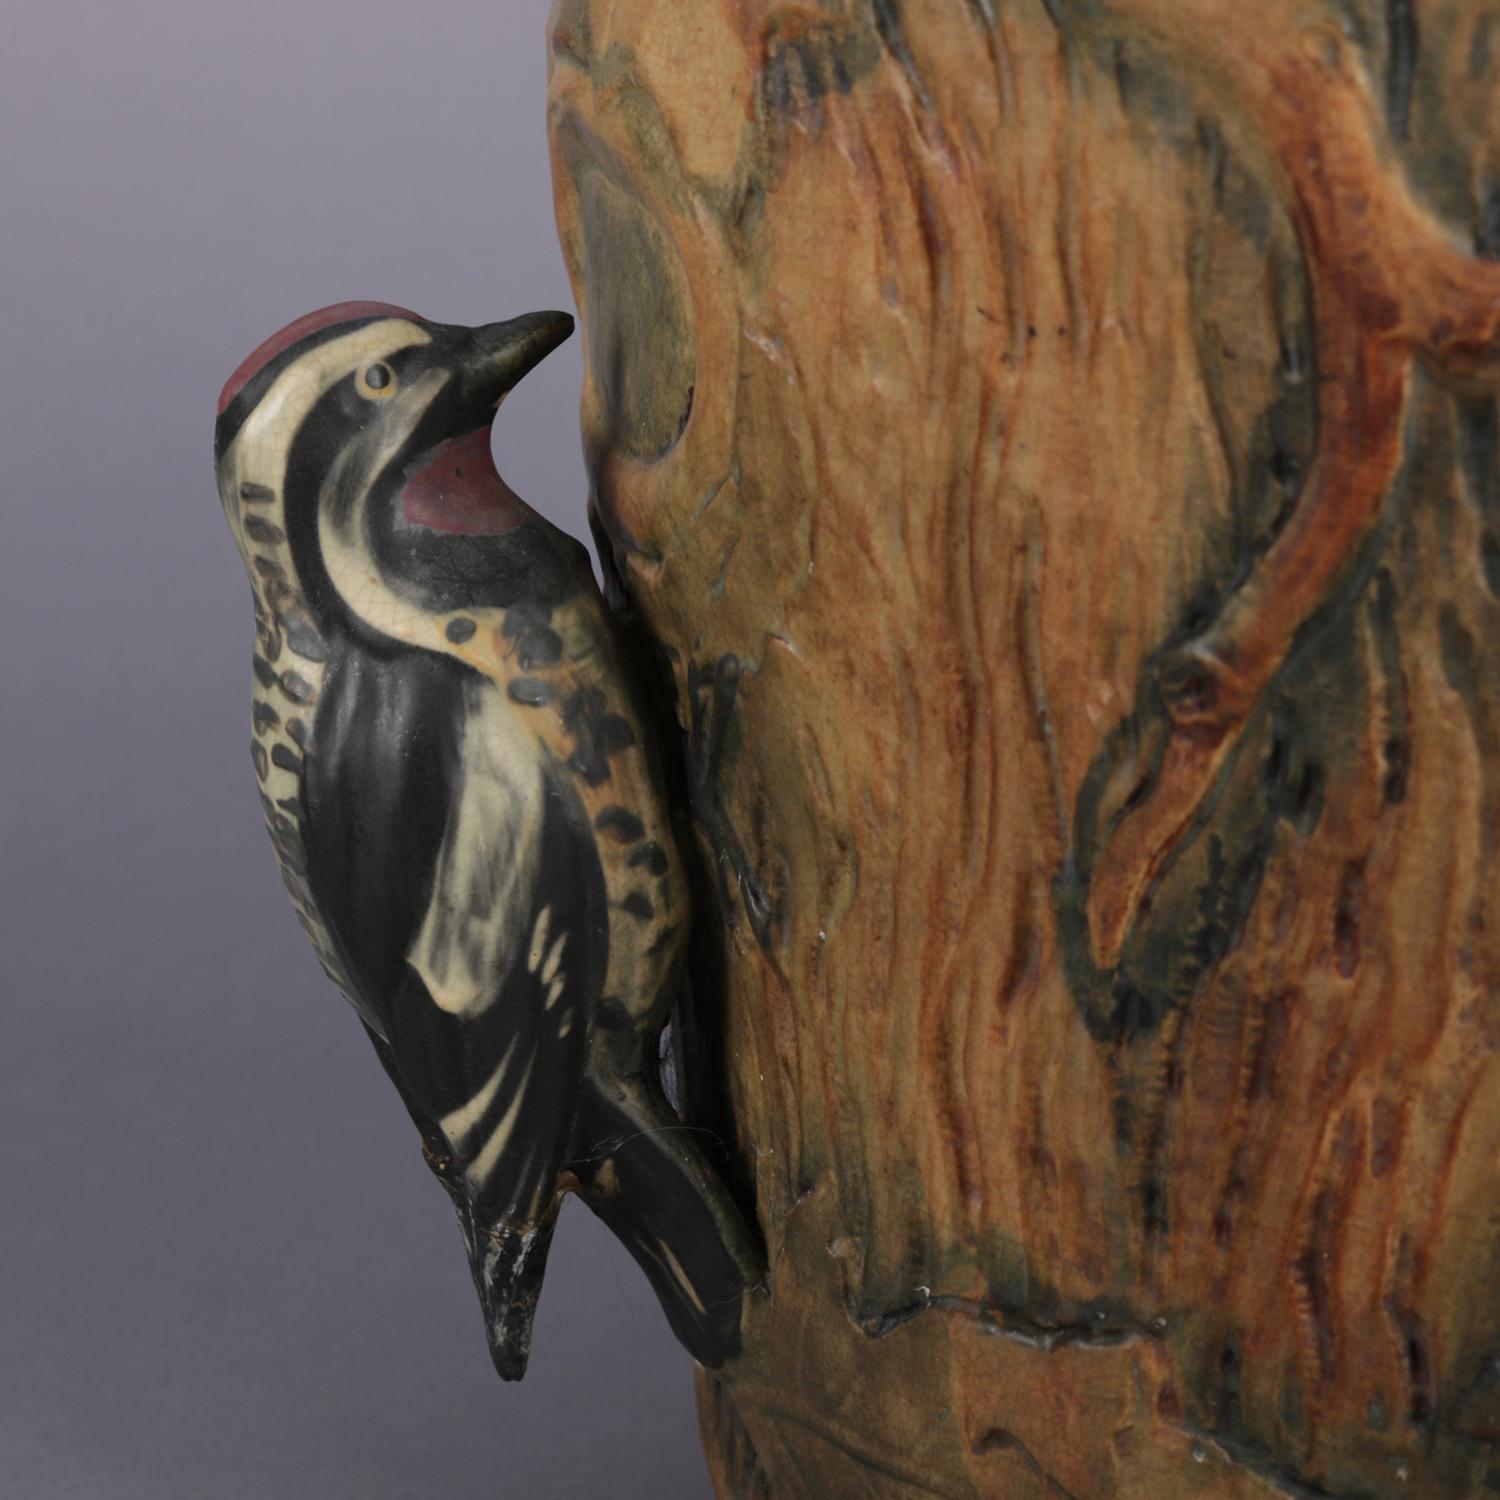 Antique figural art pottery jardiniere urn features high relief tree trunk form having oak leaves and acorns with applied woodpecker and squirrel figures on opposing sides, circa 1920,

Measures: 9.5